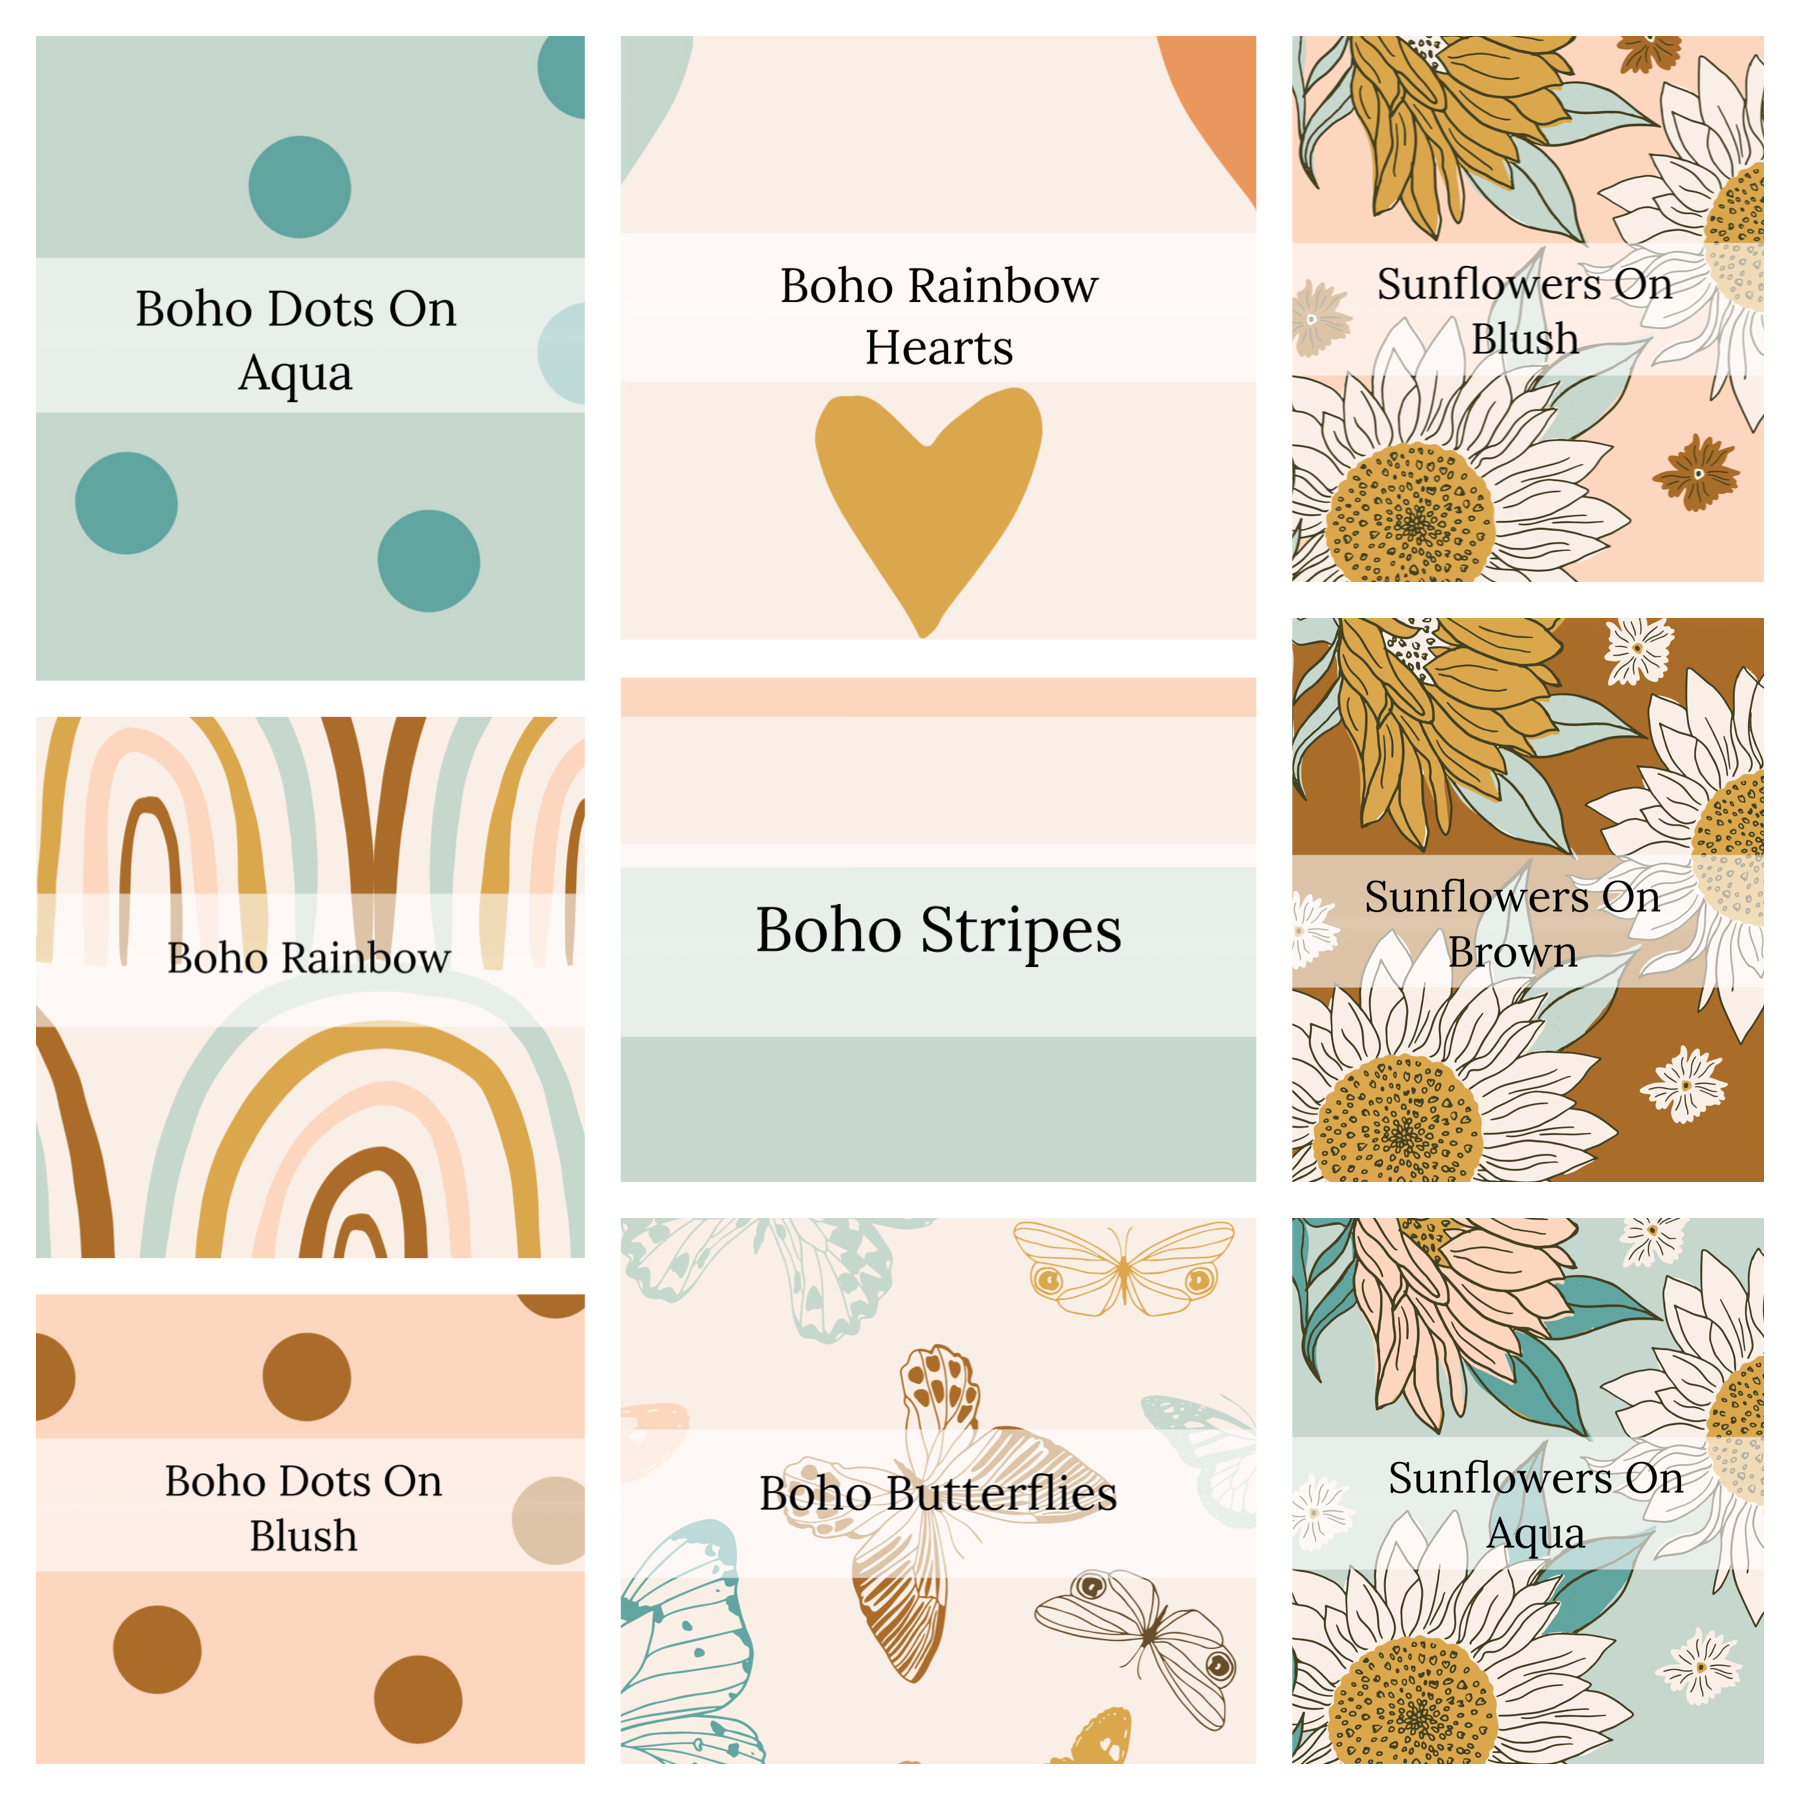 Boho blue, pink, brown and cream pattern high quality fabric adaptable for all your crafting needs. Make cute baby headwraps, fun girl hairbows, knotted headbands for adults or kids, clothing, and more!